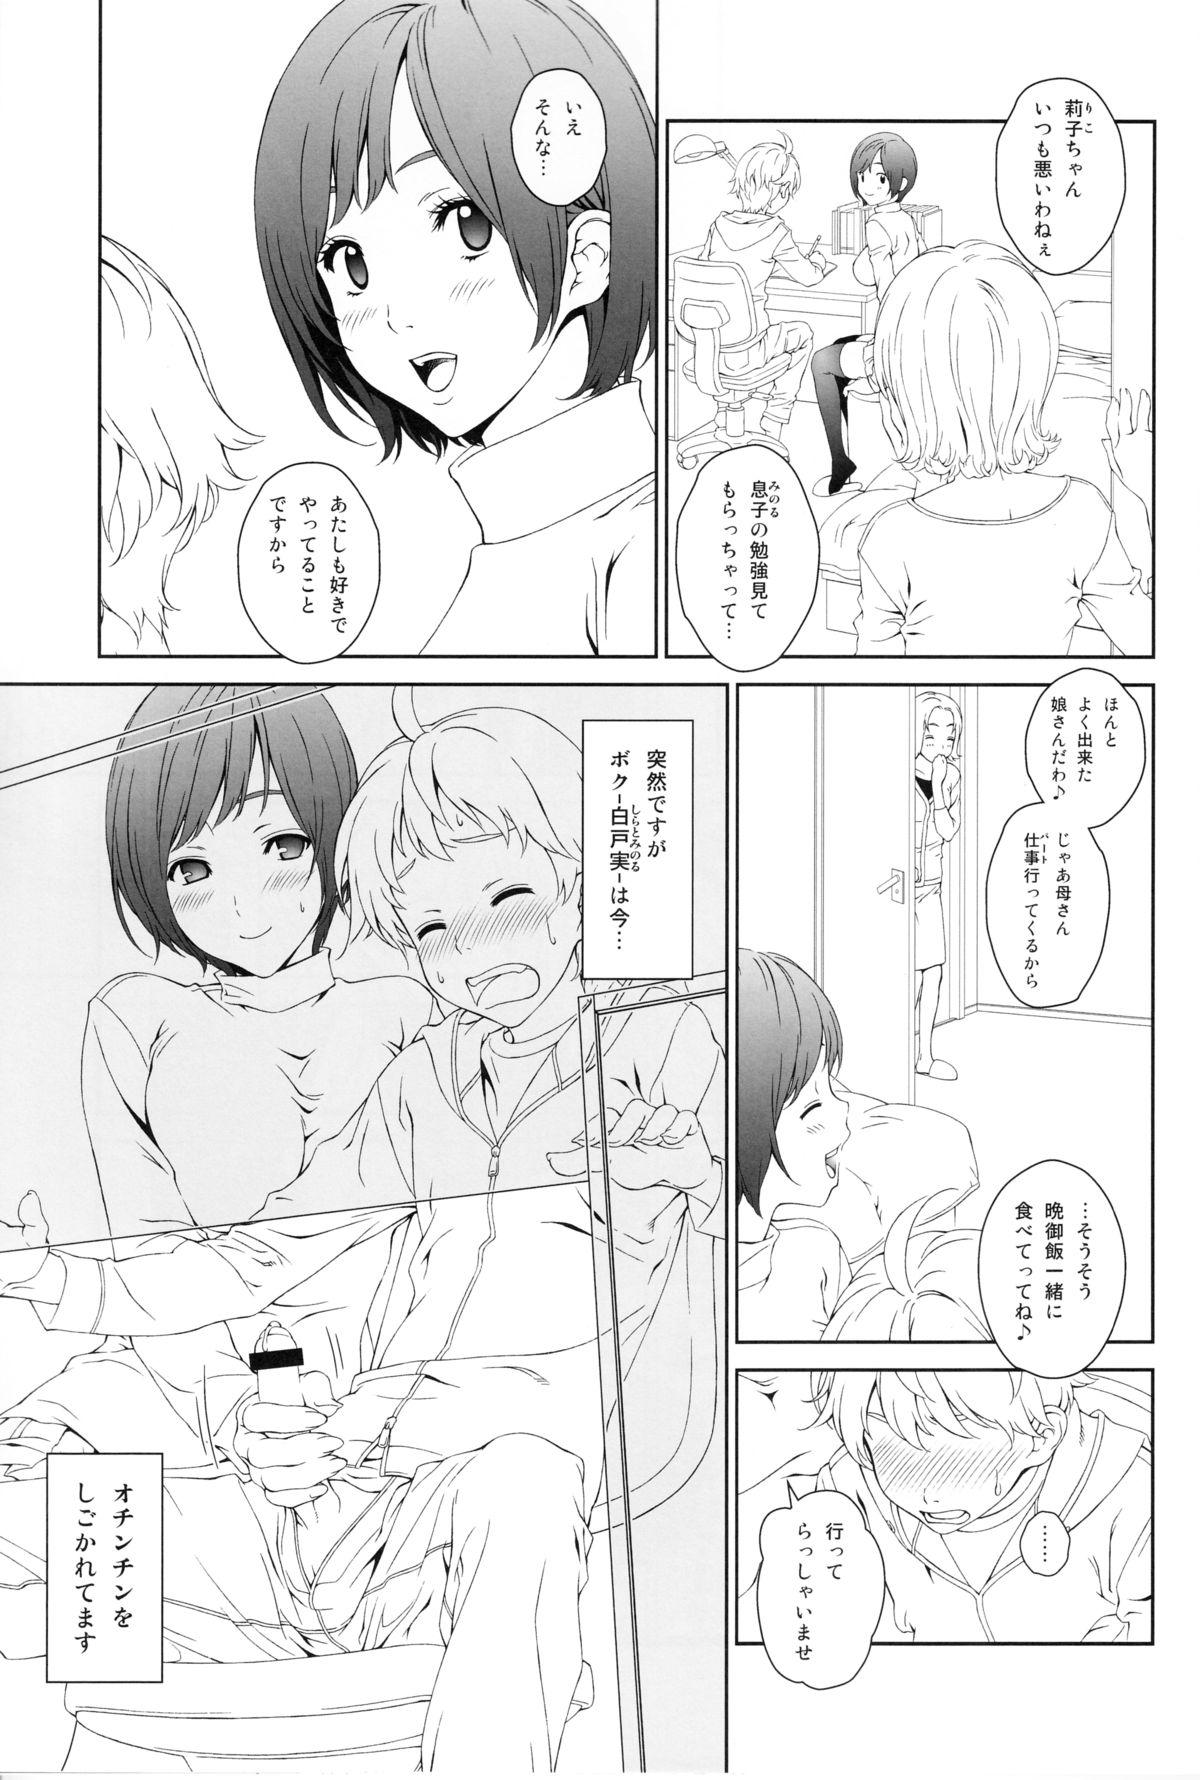 Three Some Love Me 1 Oral Sex - Page 4